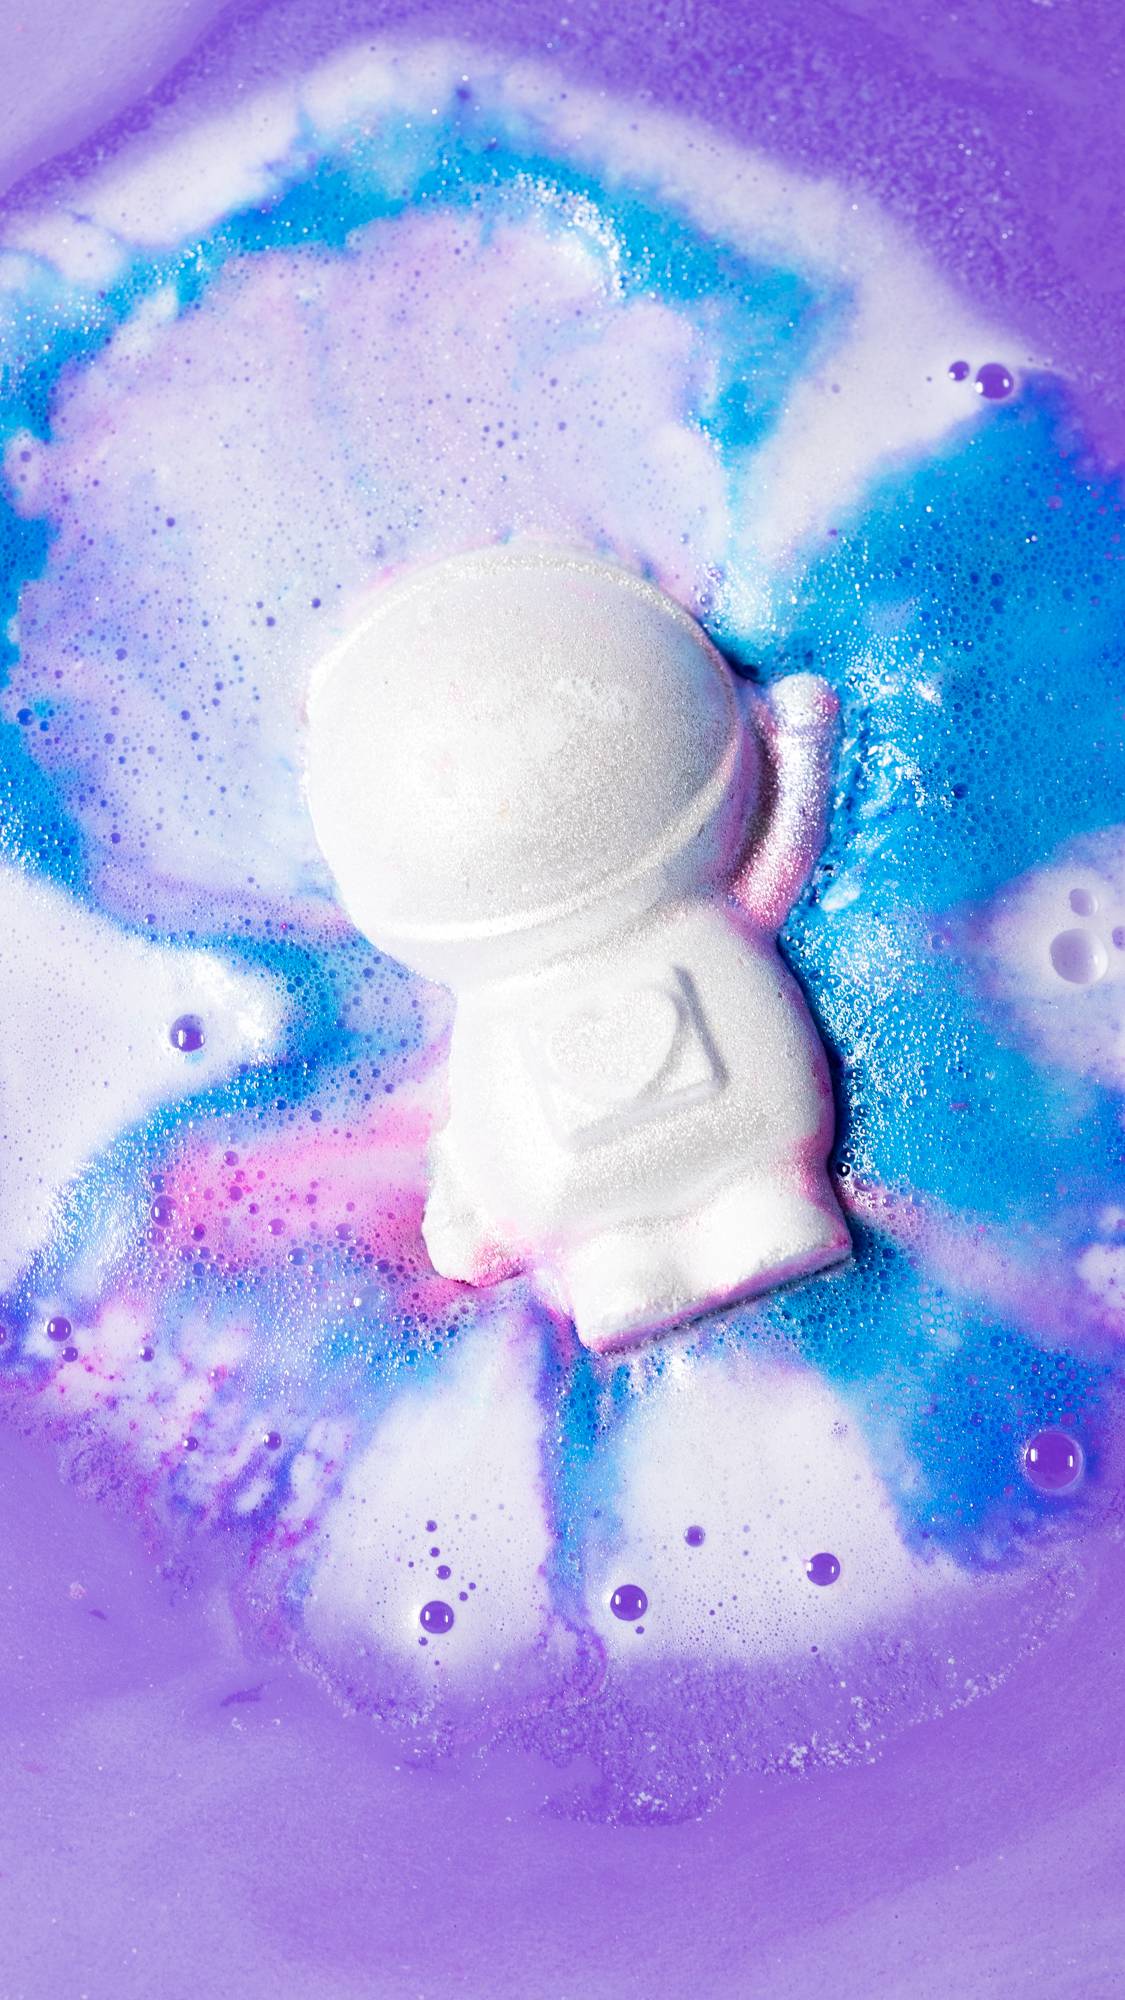 The bath bomb sits in the bath surrounded by thick, foamy swirls of pink, purple and blue.